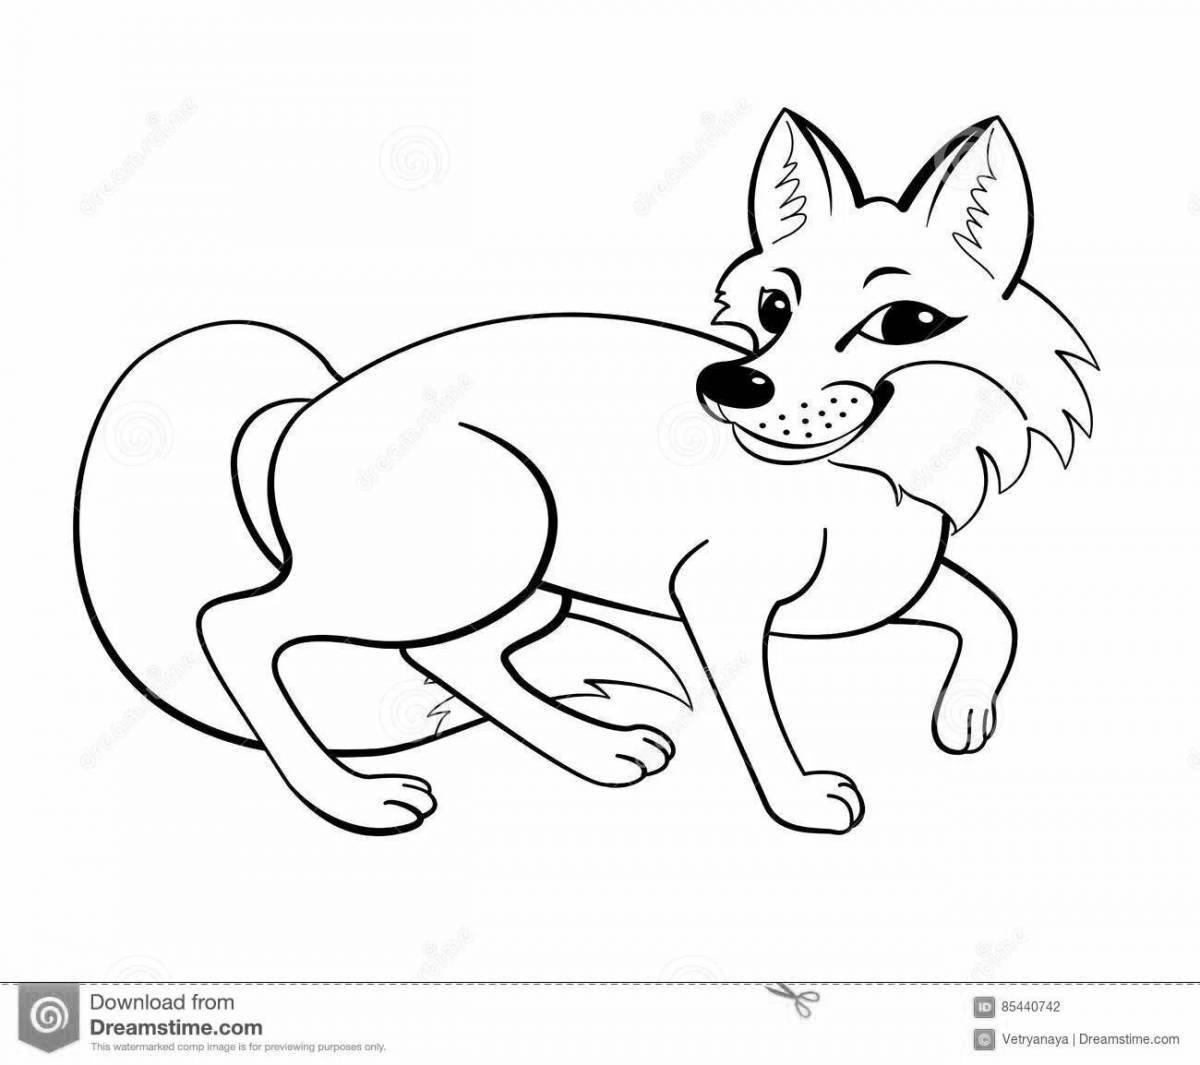 Exquisite red fox coloring book